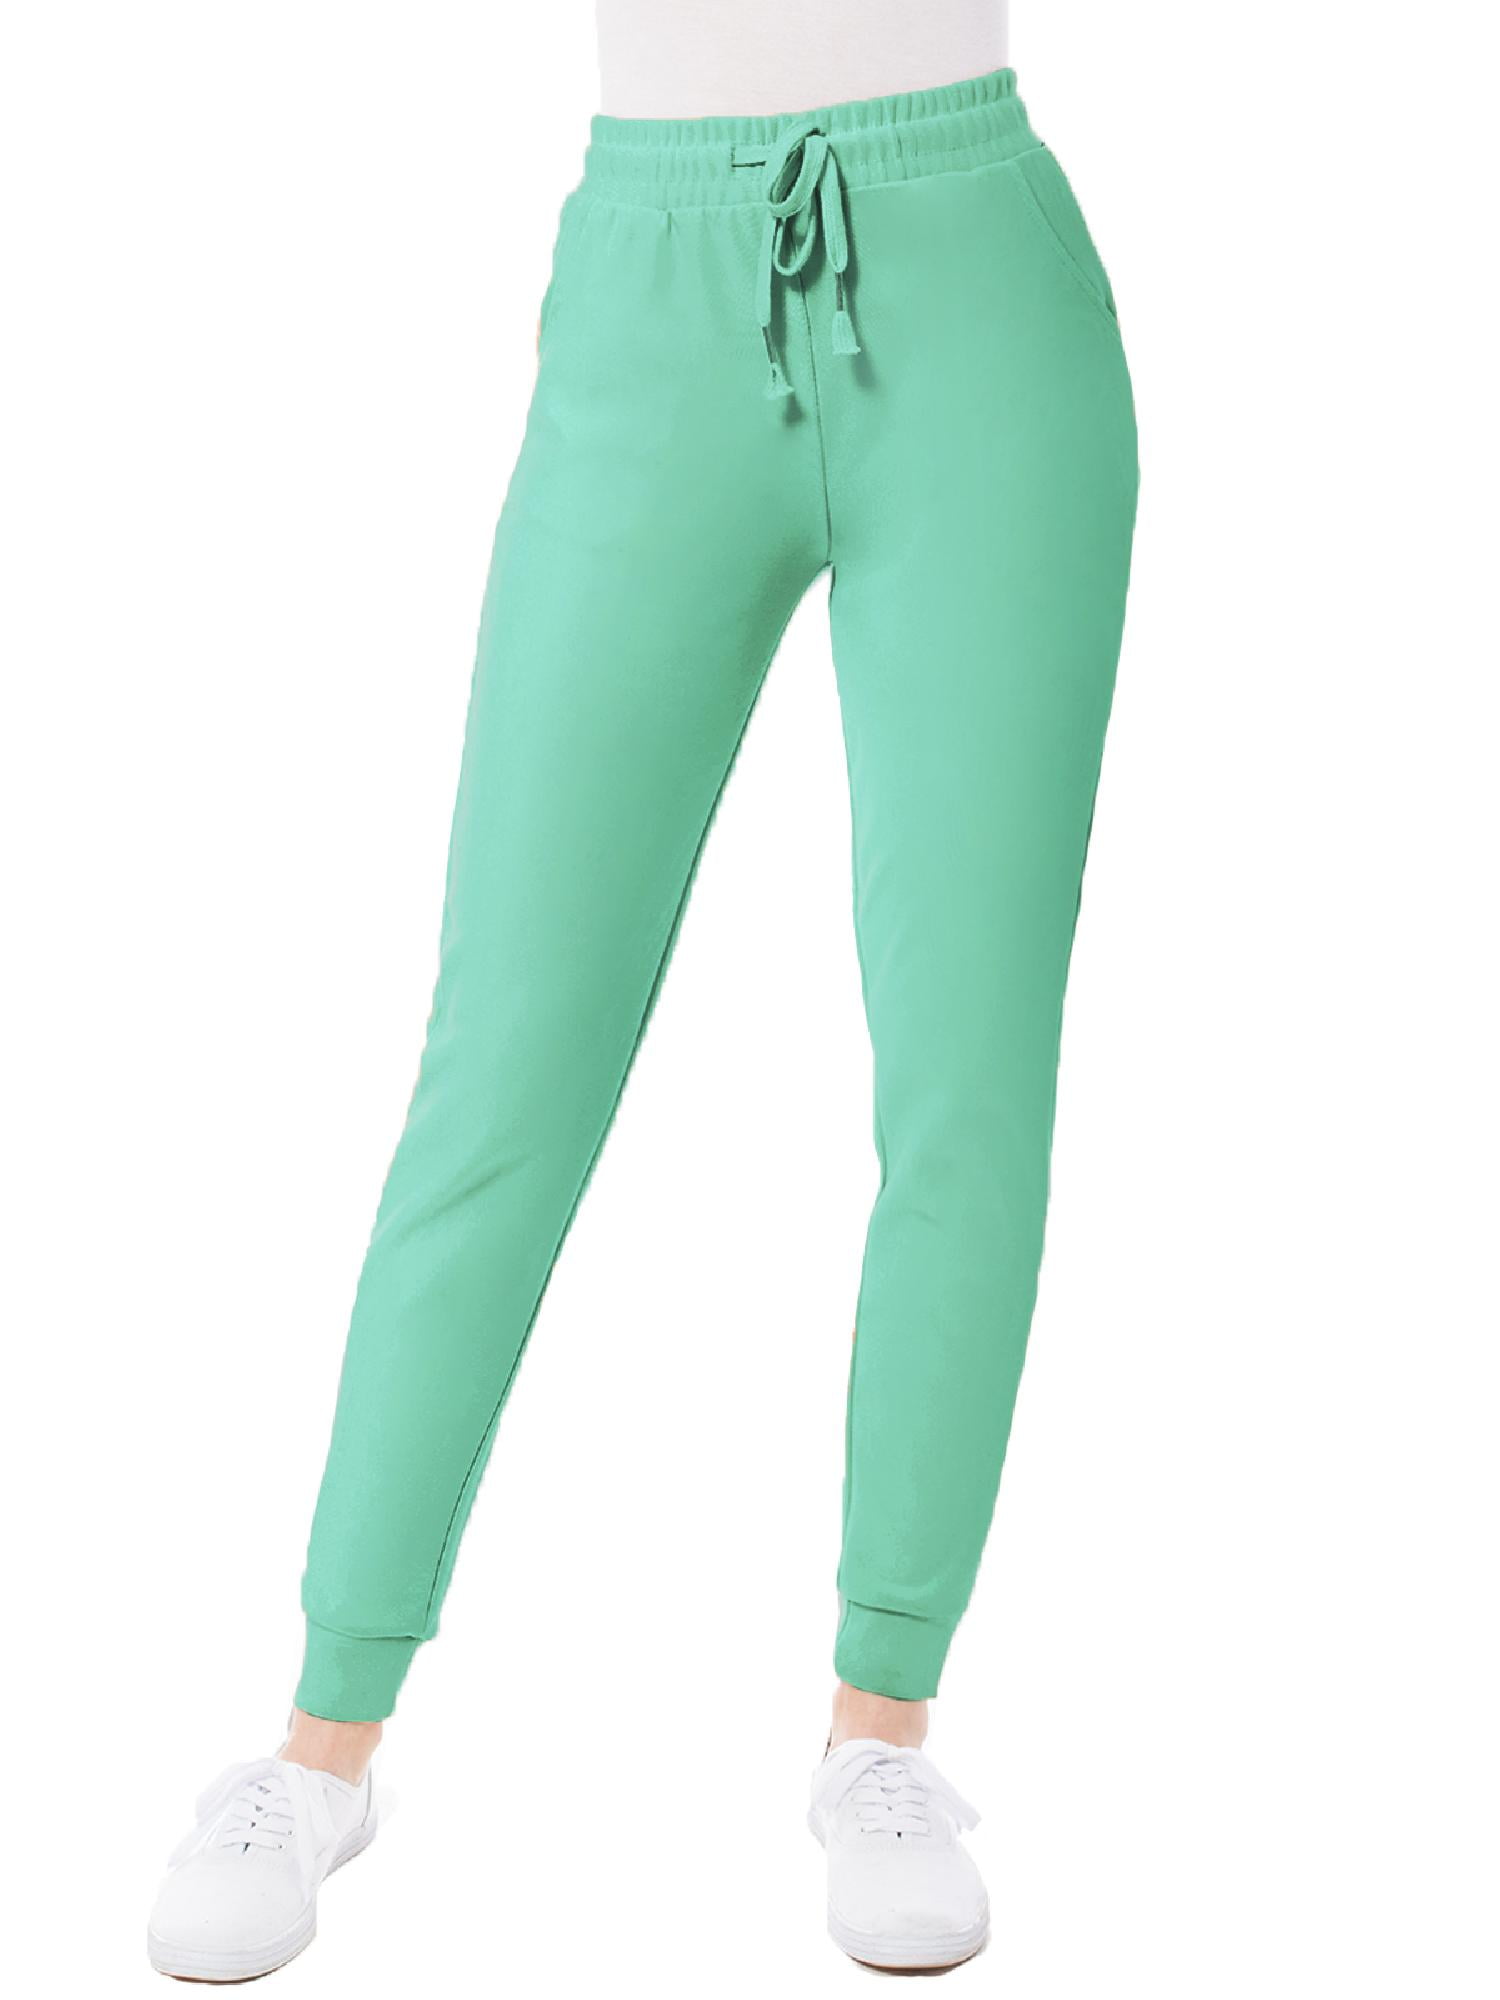 Made by Olivia Women's Lightweight Scuba Joggers with Pockets for Women  Workout & Lounge Pants 